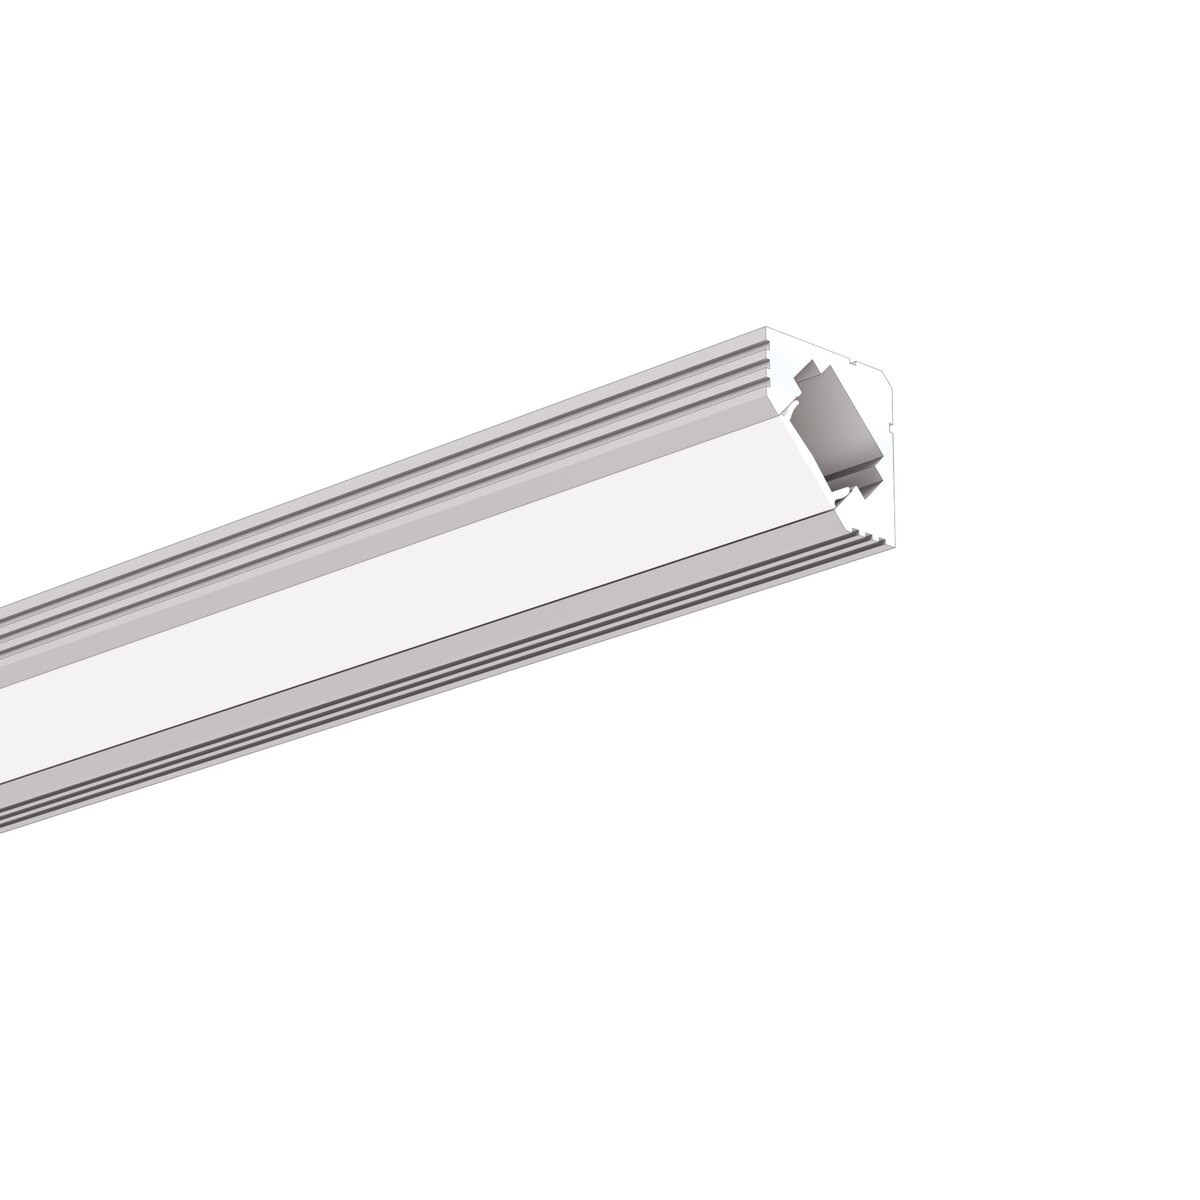 KLUS Satin S Cover for Focused Beam Angles using LED Strip Lights